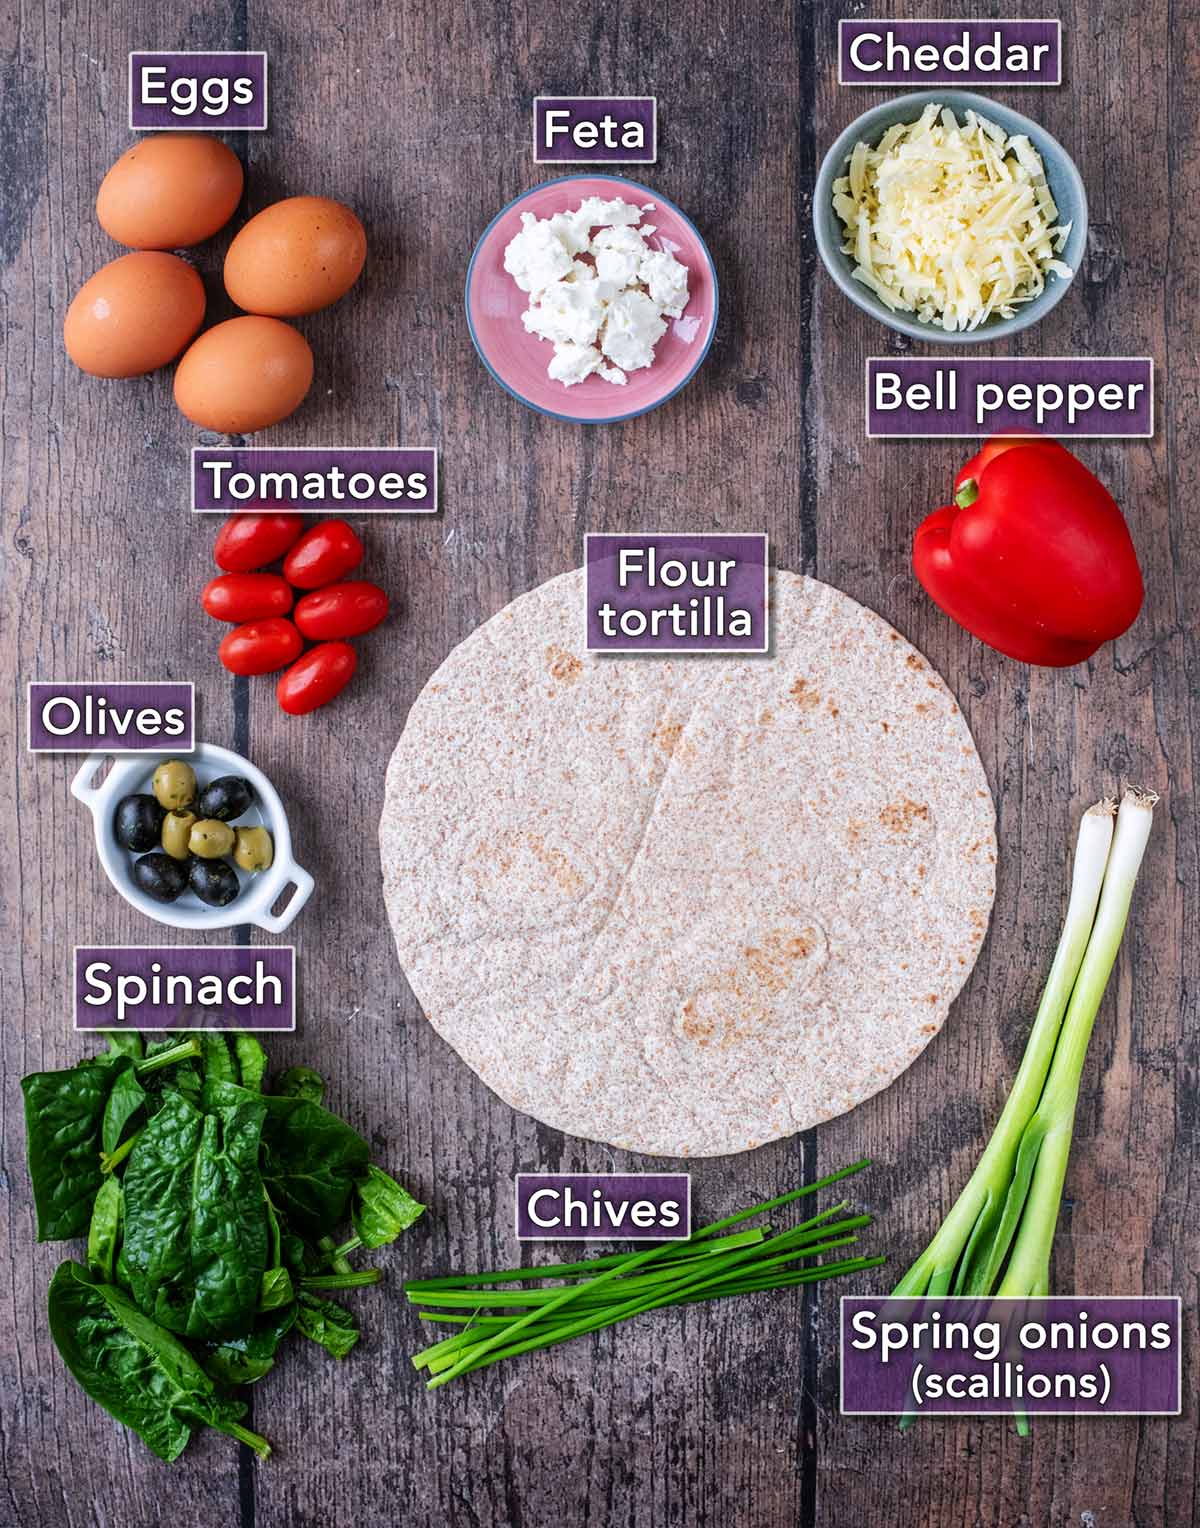 All the ingredients needed for this recipe each with a text title overlay.